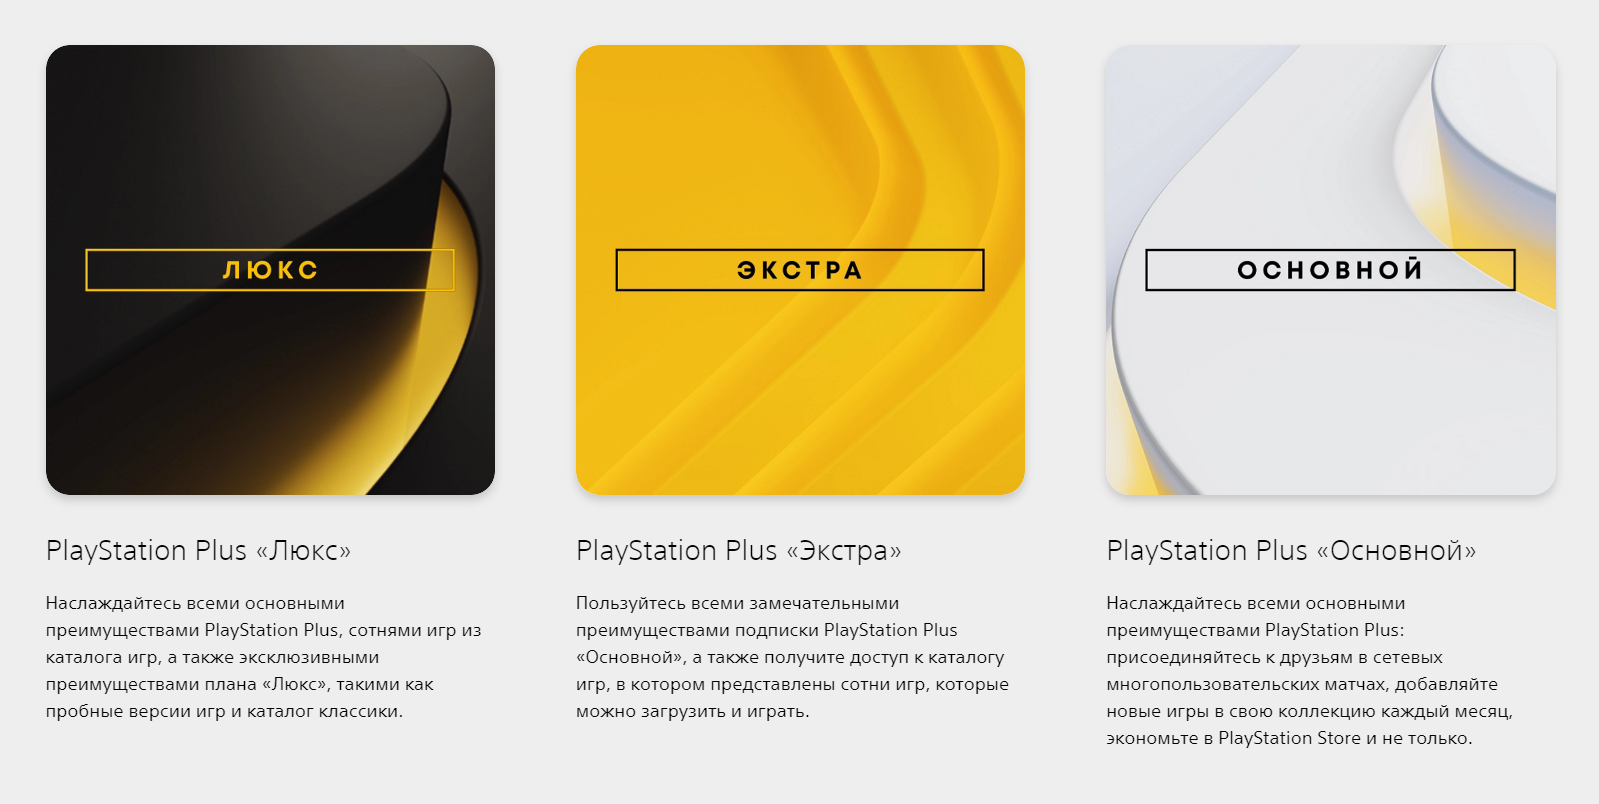 PS Plus Essential Extra Deluxe 1-12 months. Подписка PS Plus Essential Extra. PLAYSTATION Plus Люкс Экстра основной. PS Plus Essential Extra Deluxe.